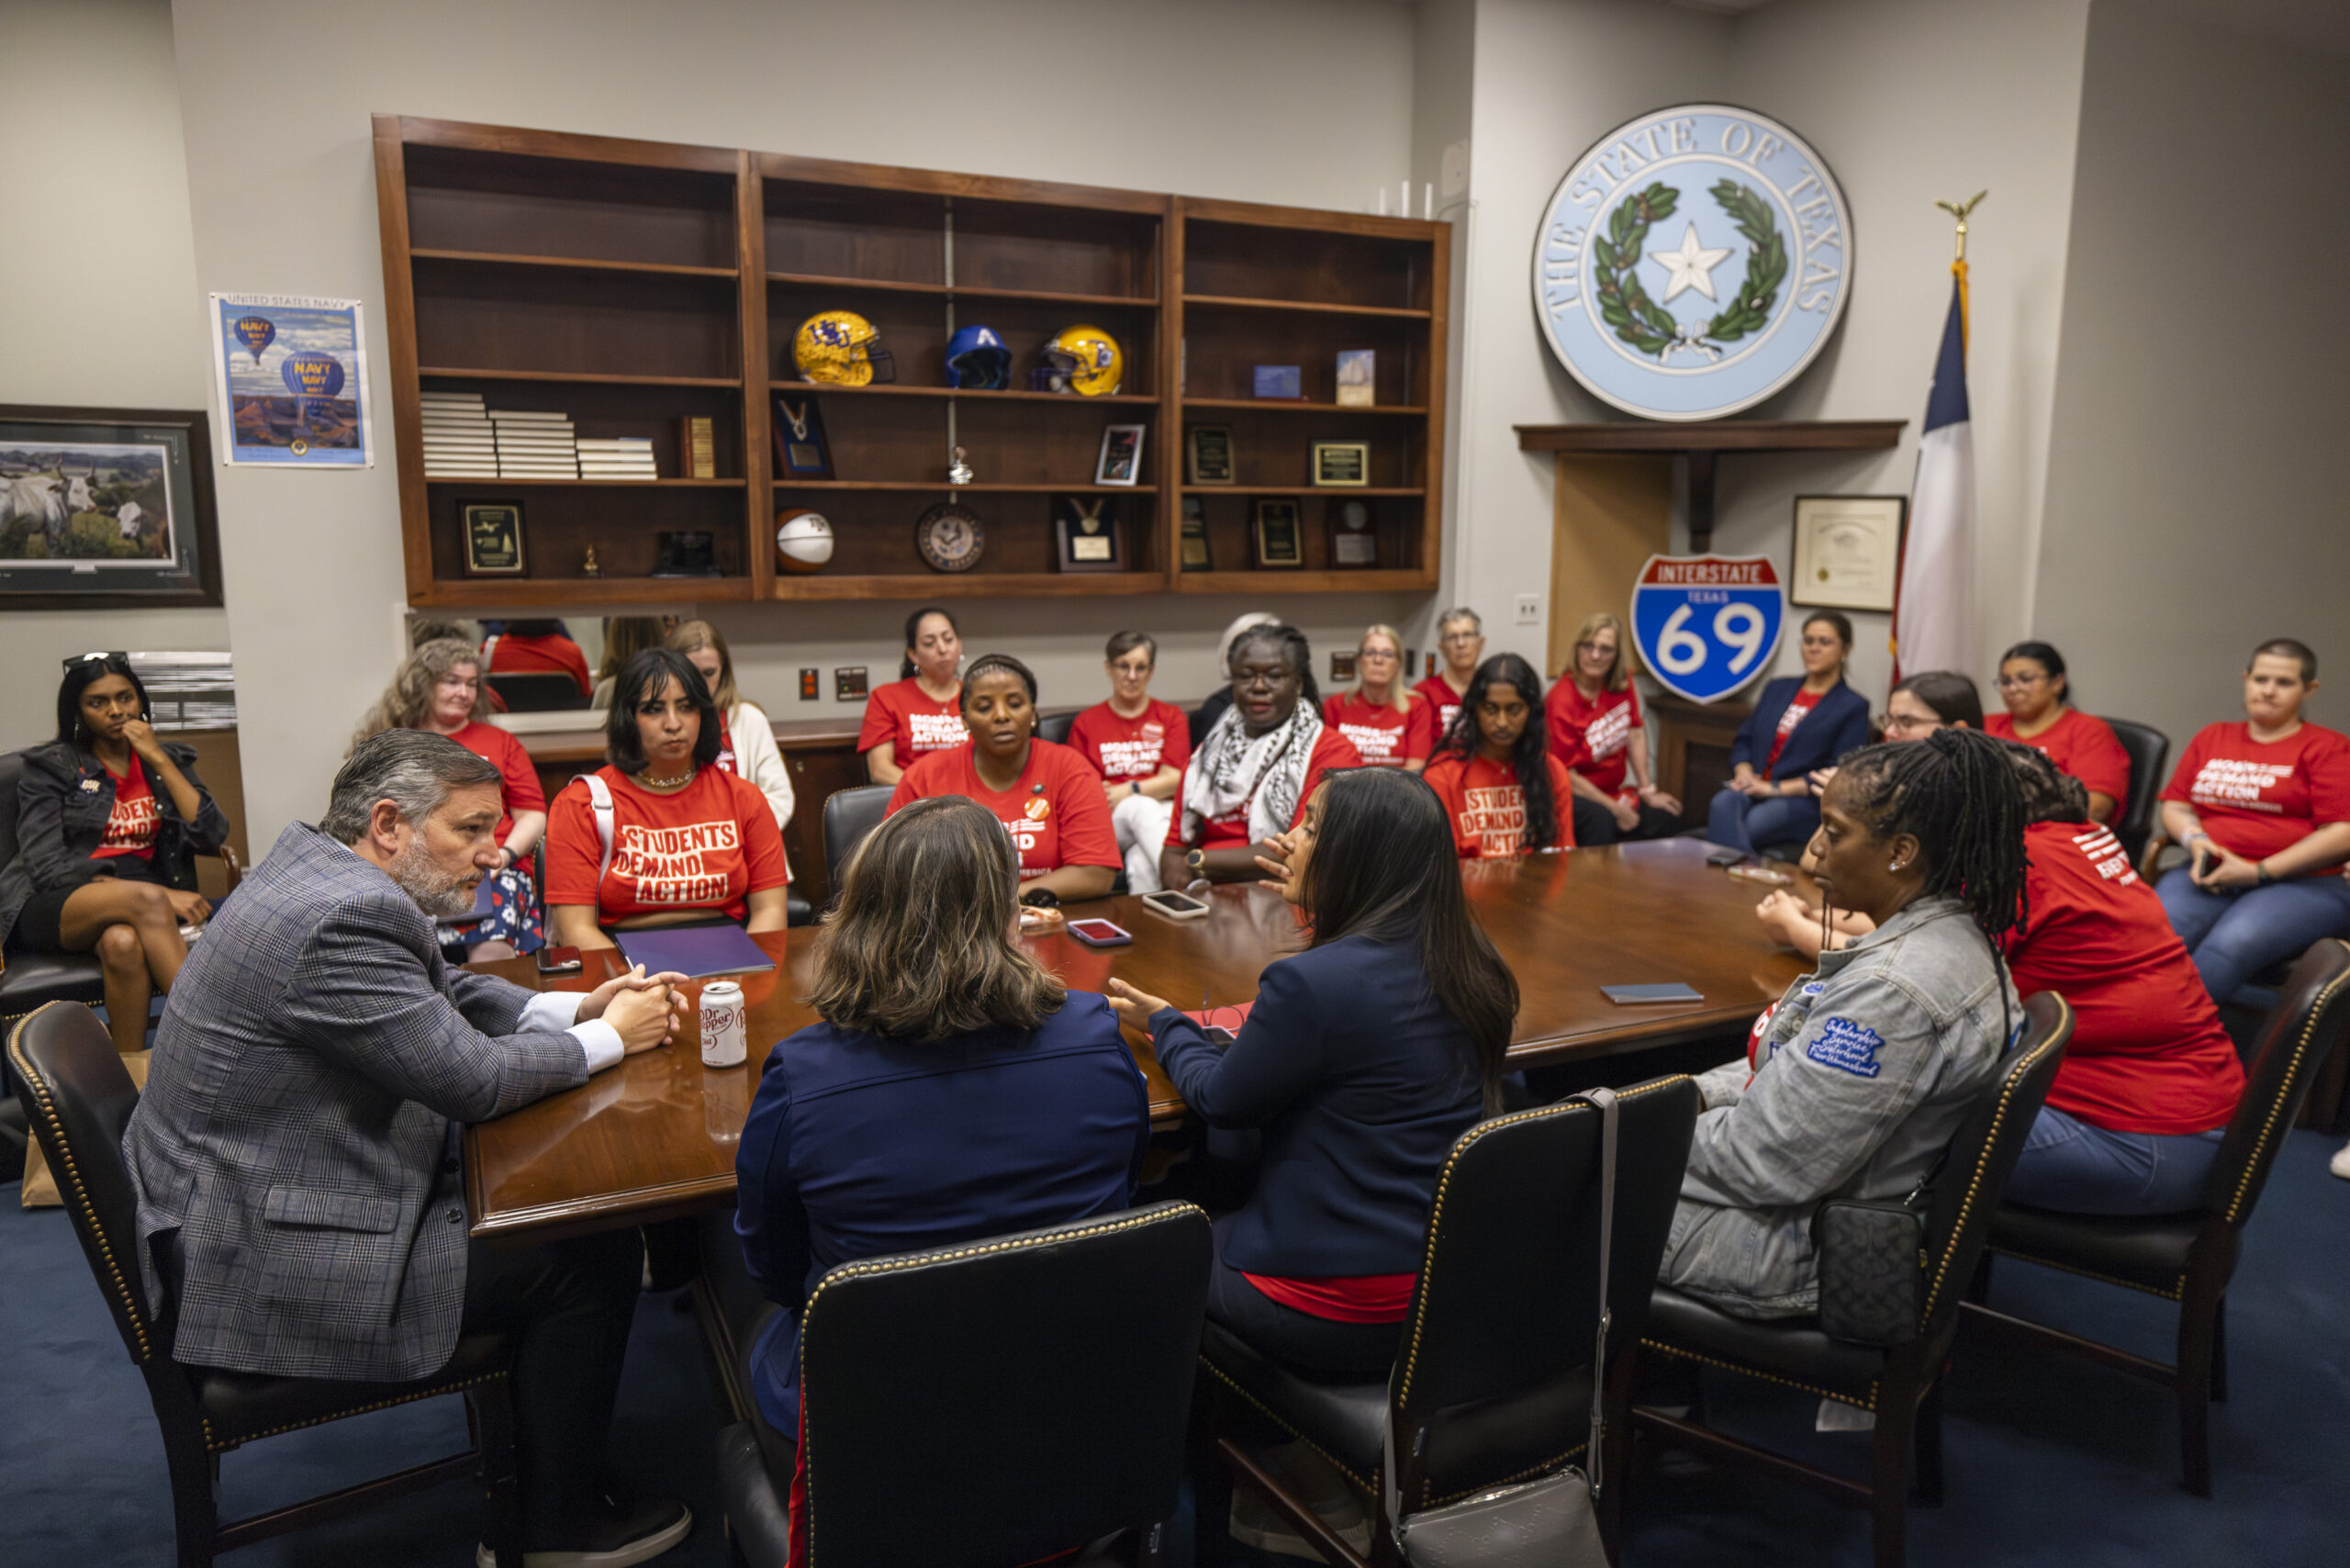 A total of 21 Moms Demand Action and Students Demand Action volunteers meet with Sen. Ted Cruz in his office in D.C. They all sit at a brown wood table and all except Cruz wear red branded t-shirts. Cruz wears a grey suit and a white collared shirt. 